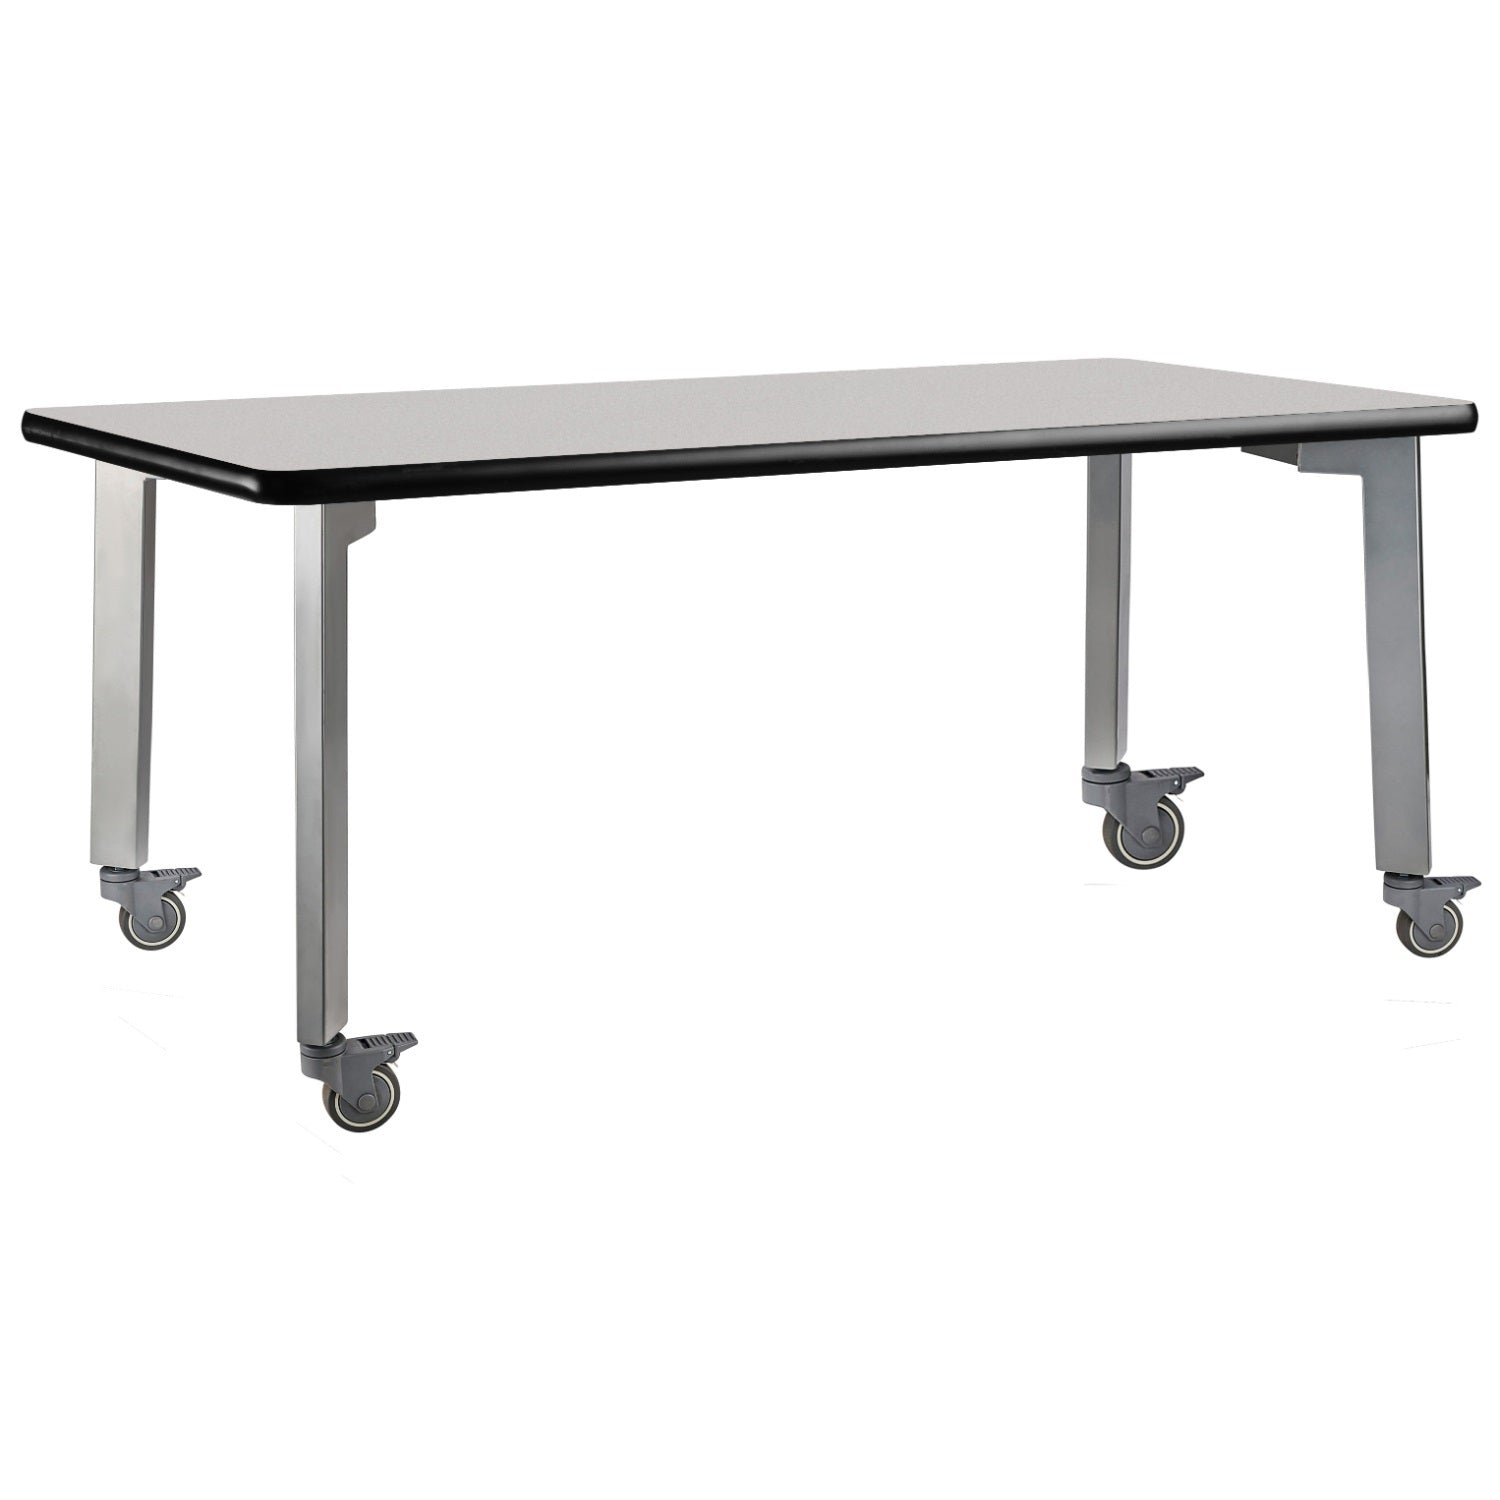 Titan Mobile Table, 48" x 84", Standard High Pressure Laminate Top with Particleboard Core and T-Mold Edge